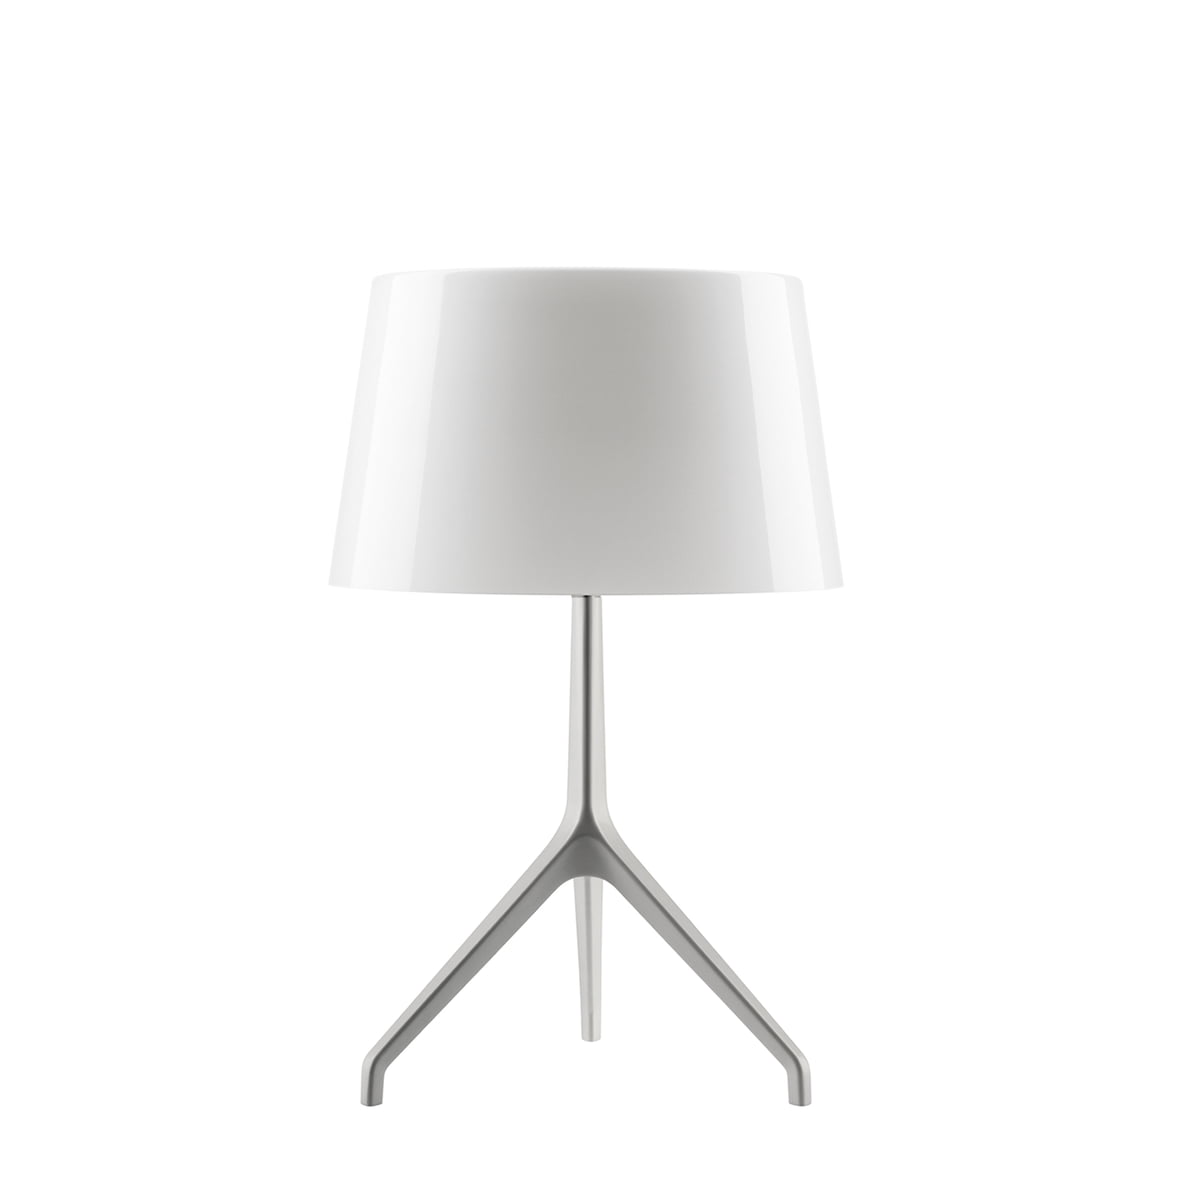 Haas onderschrift bodem Lumiere XXS table lamp by Foscarini in our shop